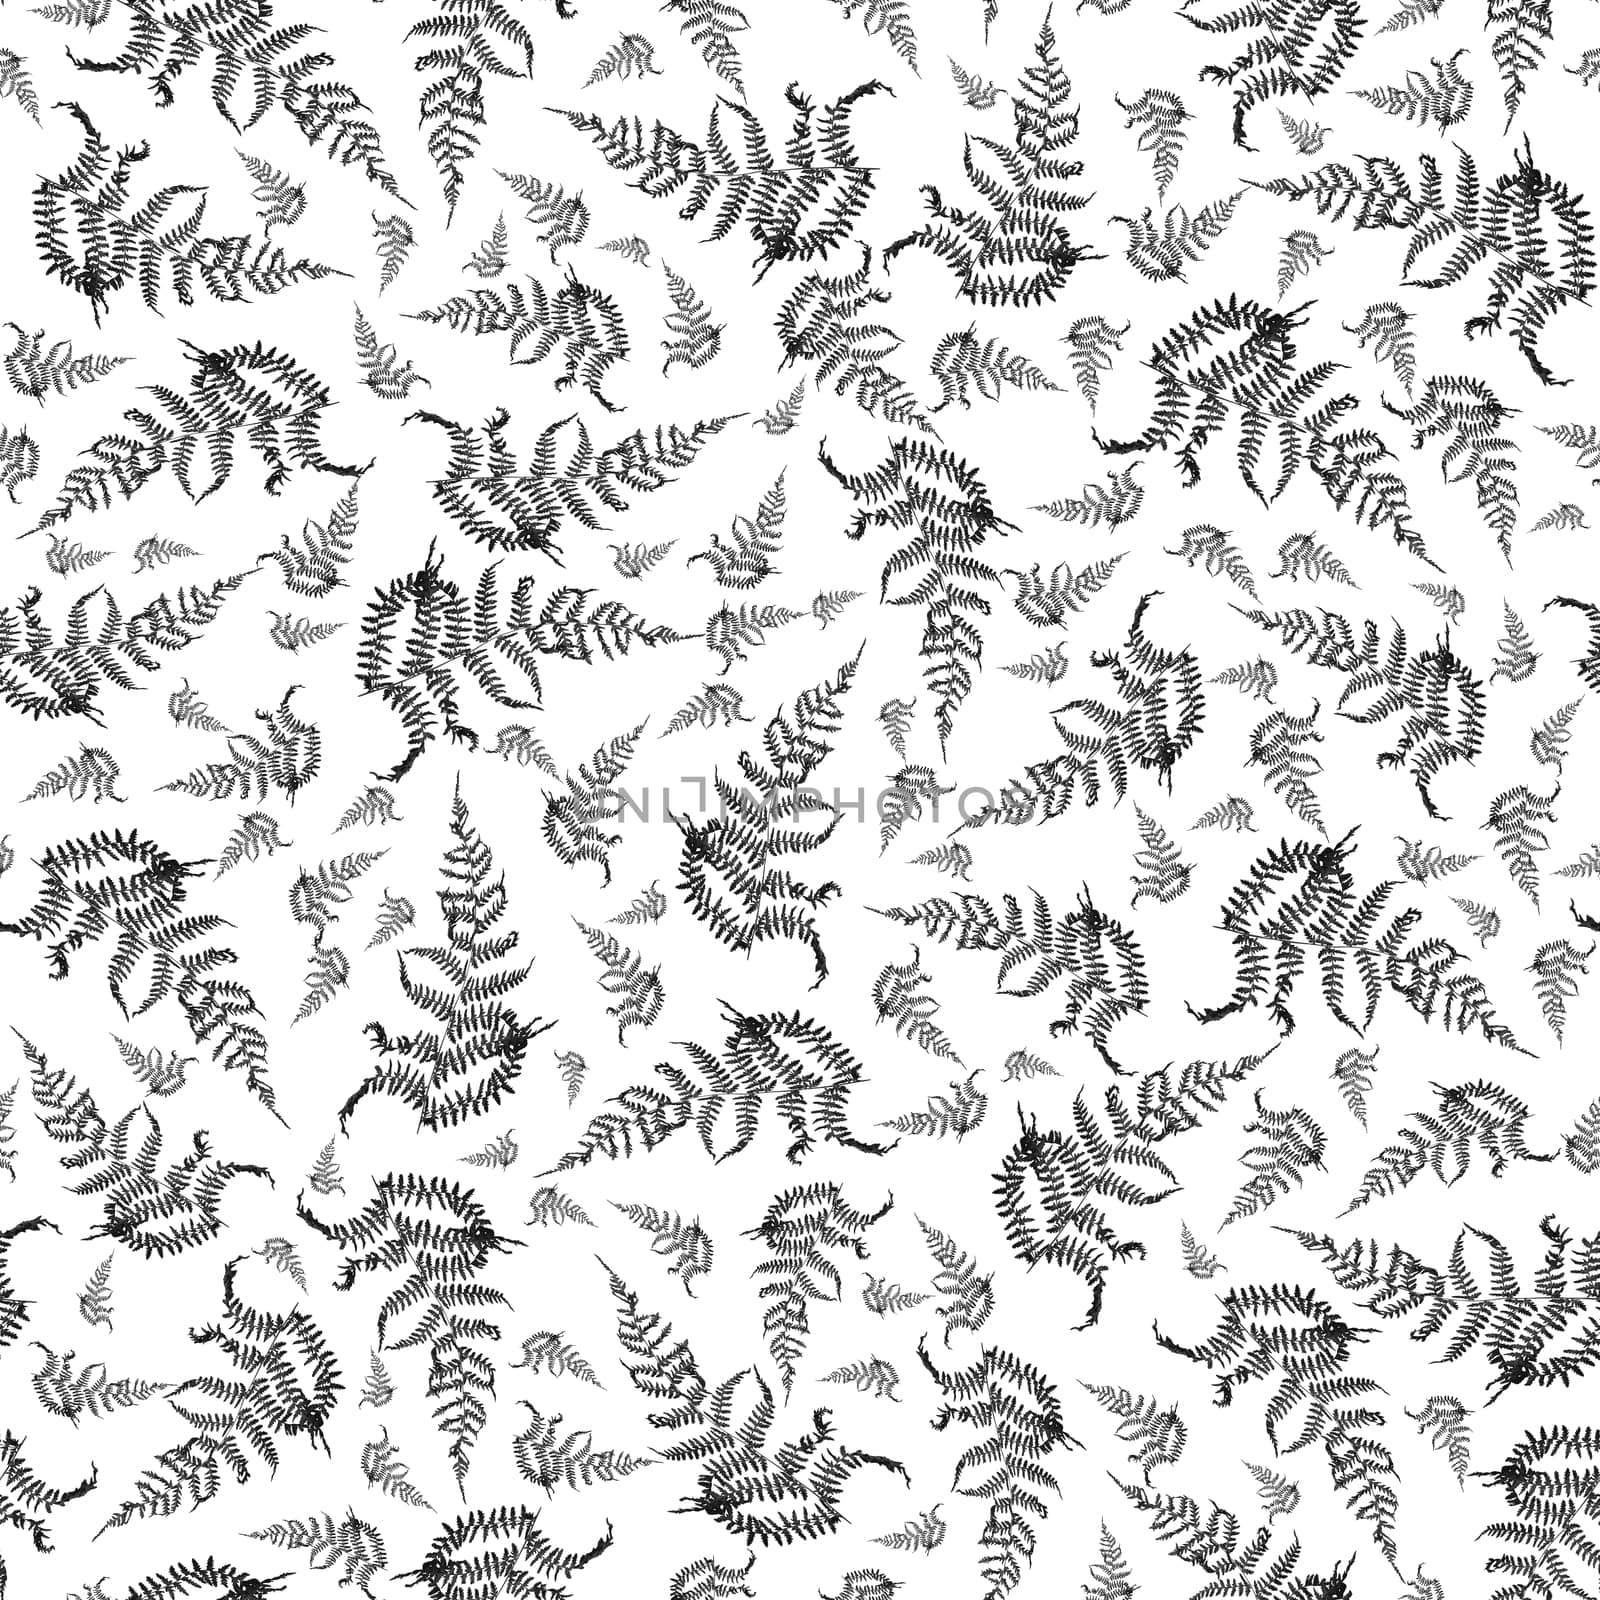 ornate seamless black and white modern repeating fern background design by philopenshaw